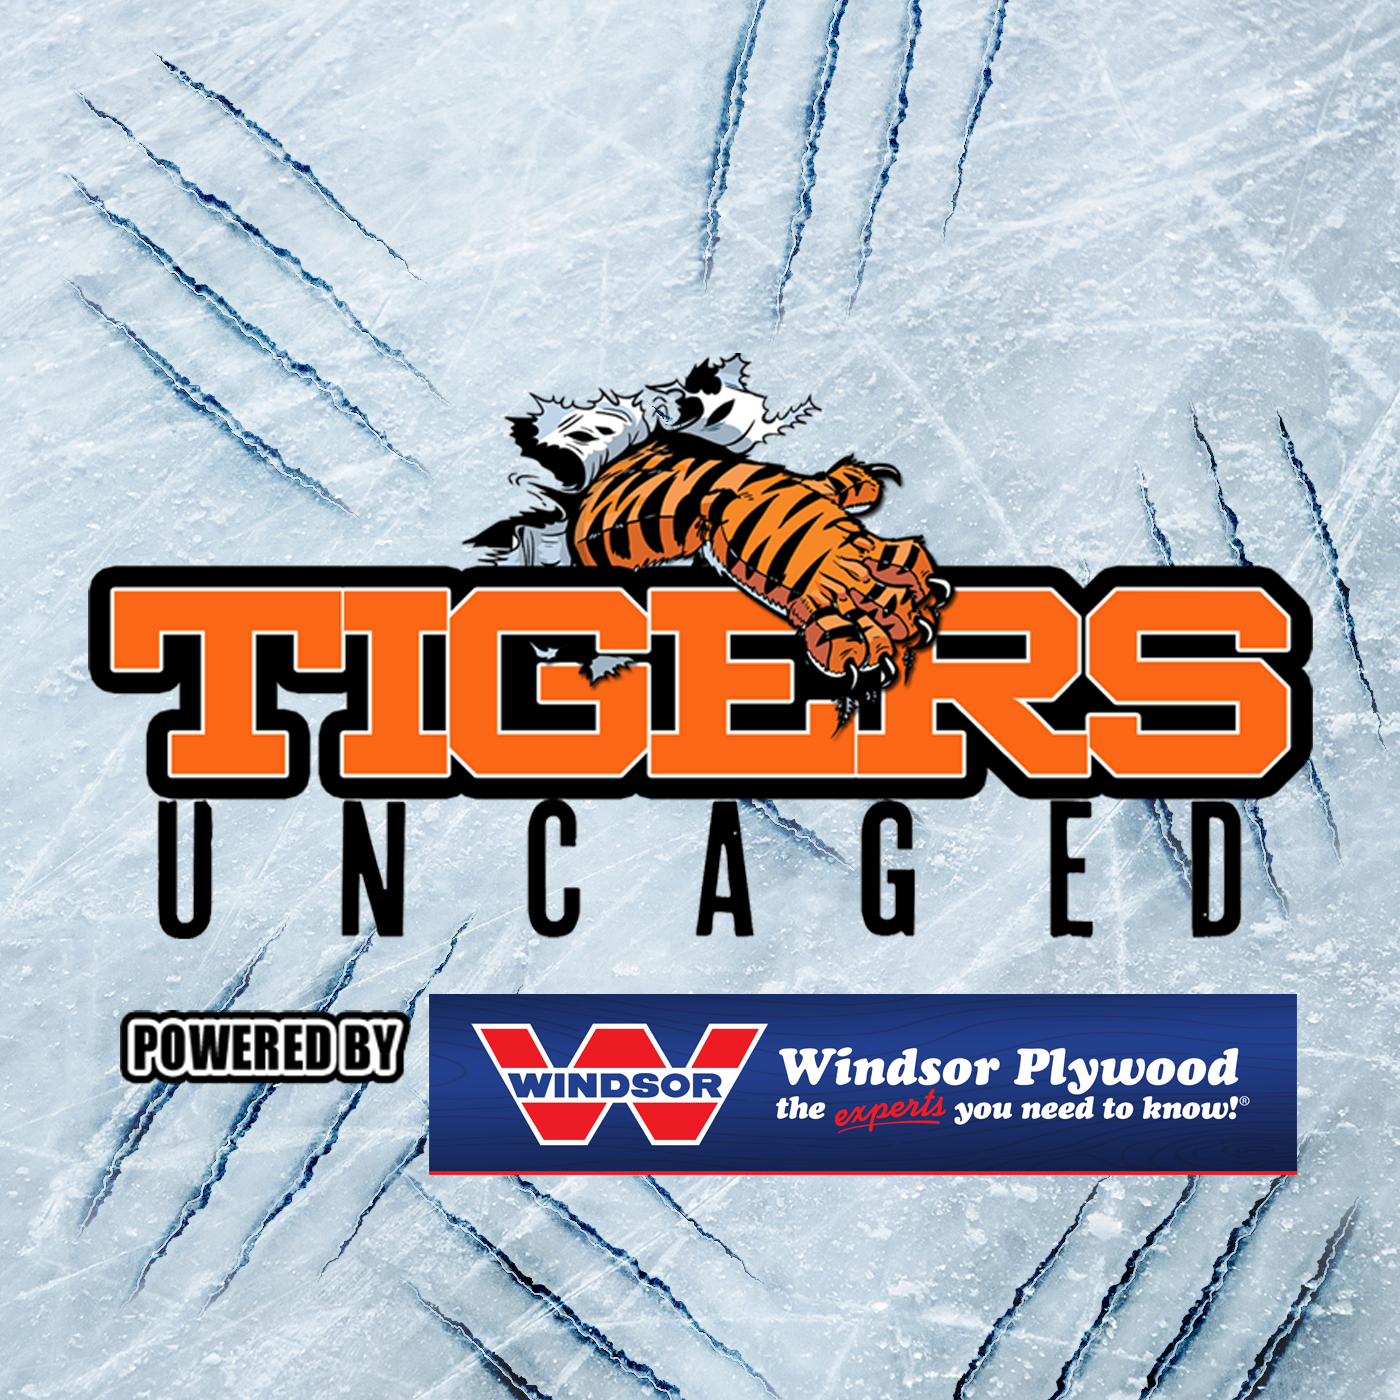 Tigers Uncaged